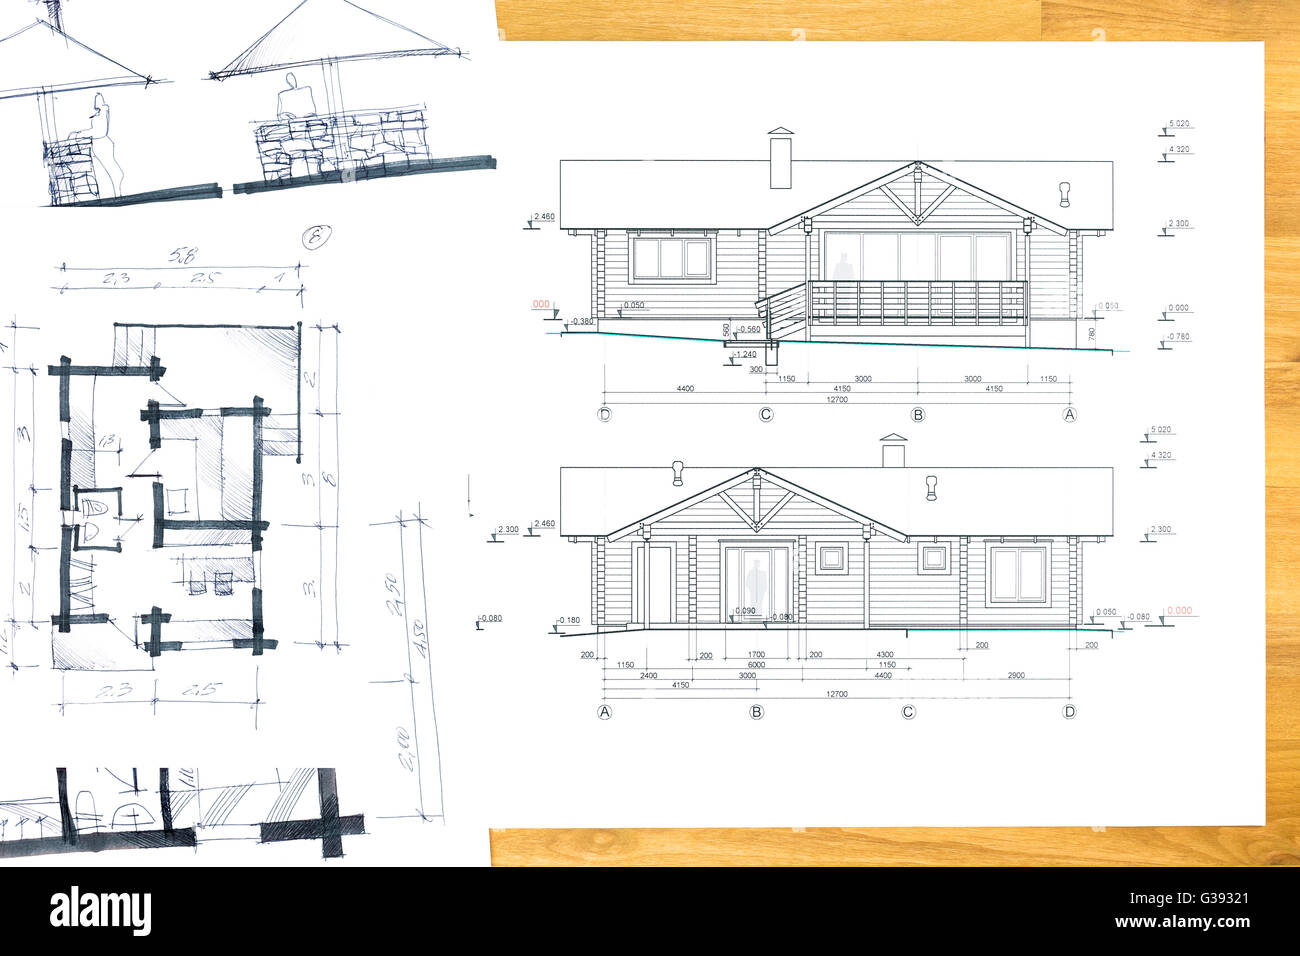 designer's hand drawing with house plan blueprints Stock Photo